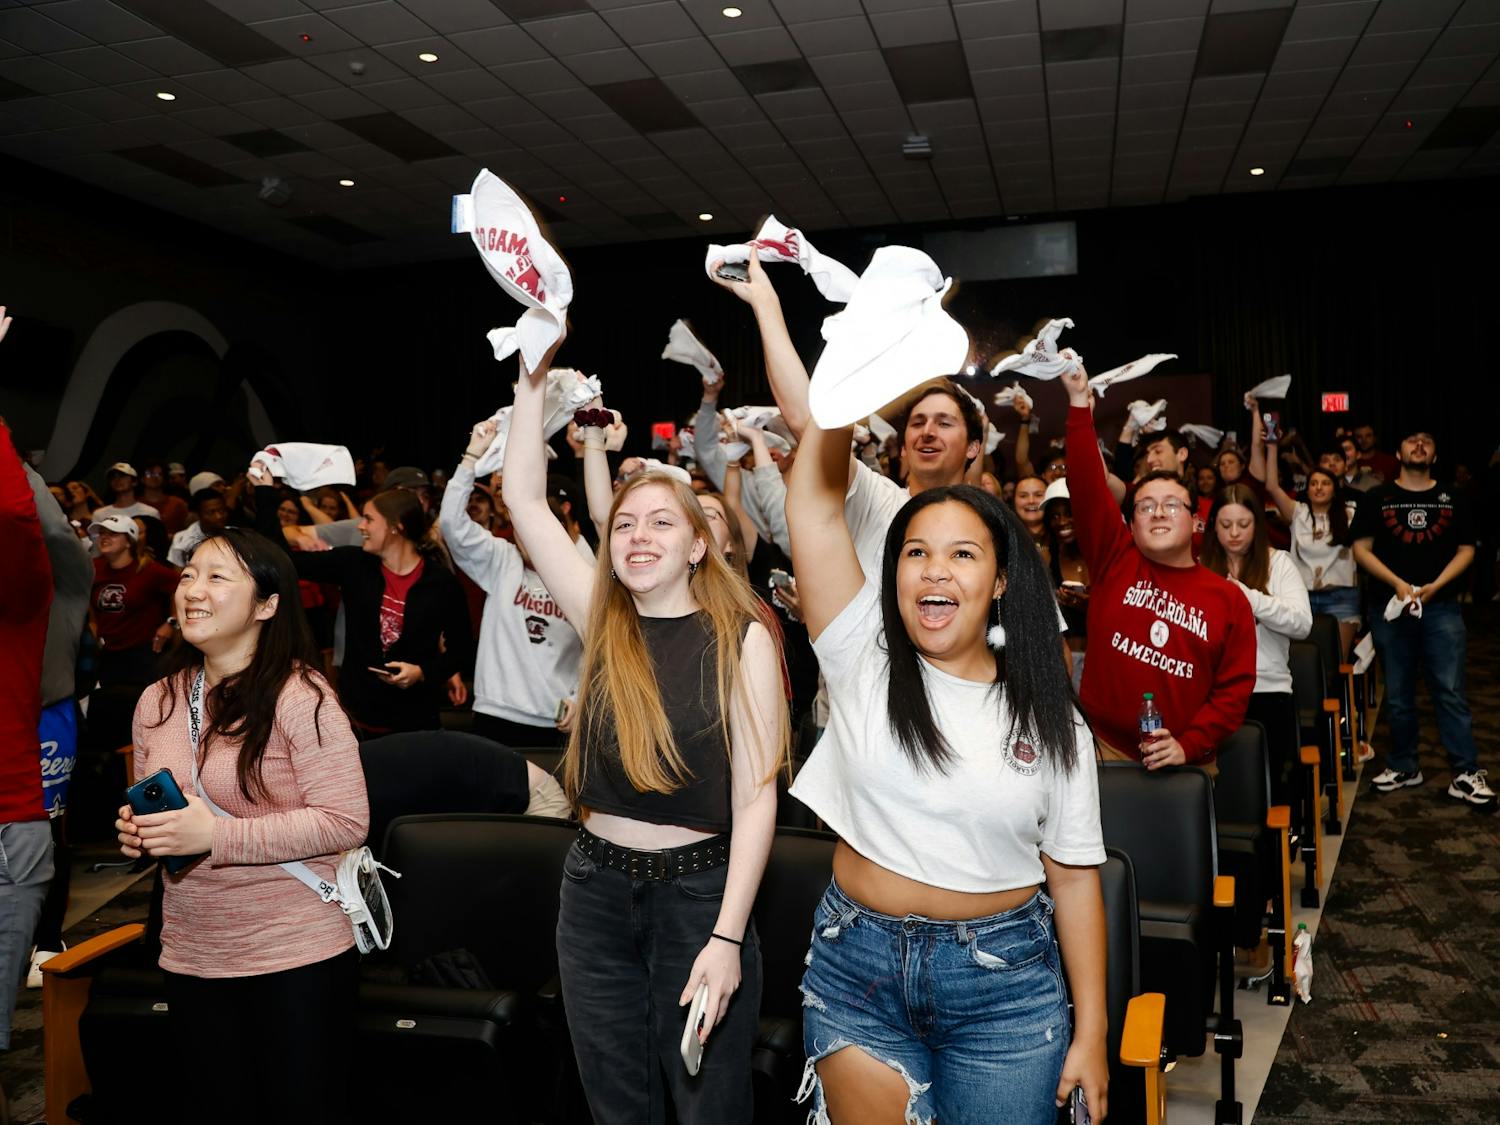 Students cheer and wave their rally towels in the Russell House theater after the women’s basketball team beats the University of Connecticut in the NCAA championship game on April 3, 2022, in Columbia, SC.